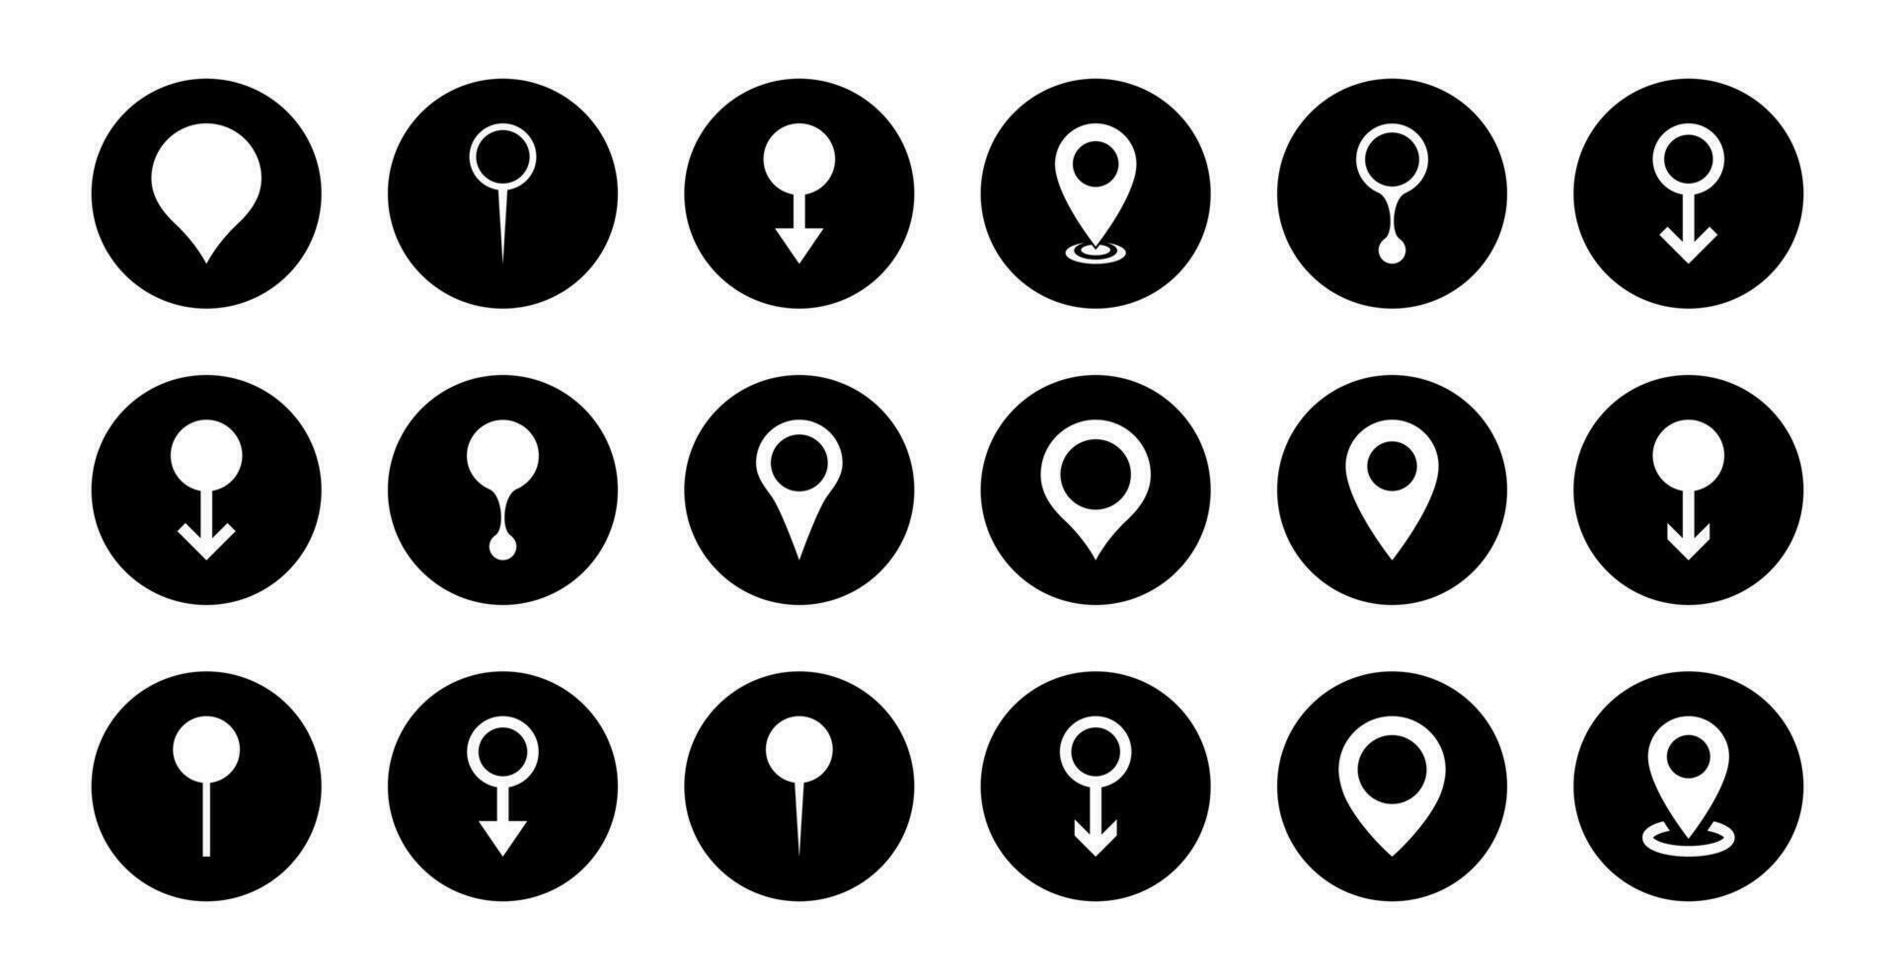 Map pin location icon vector in black circle. Pointer navigation sign symbol set collection